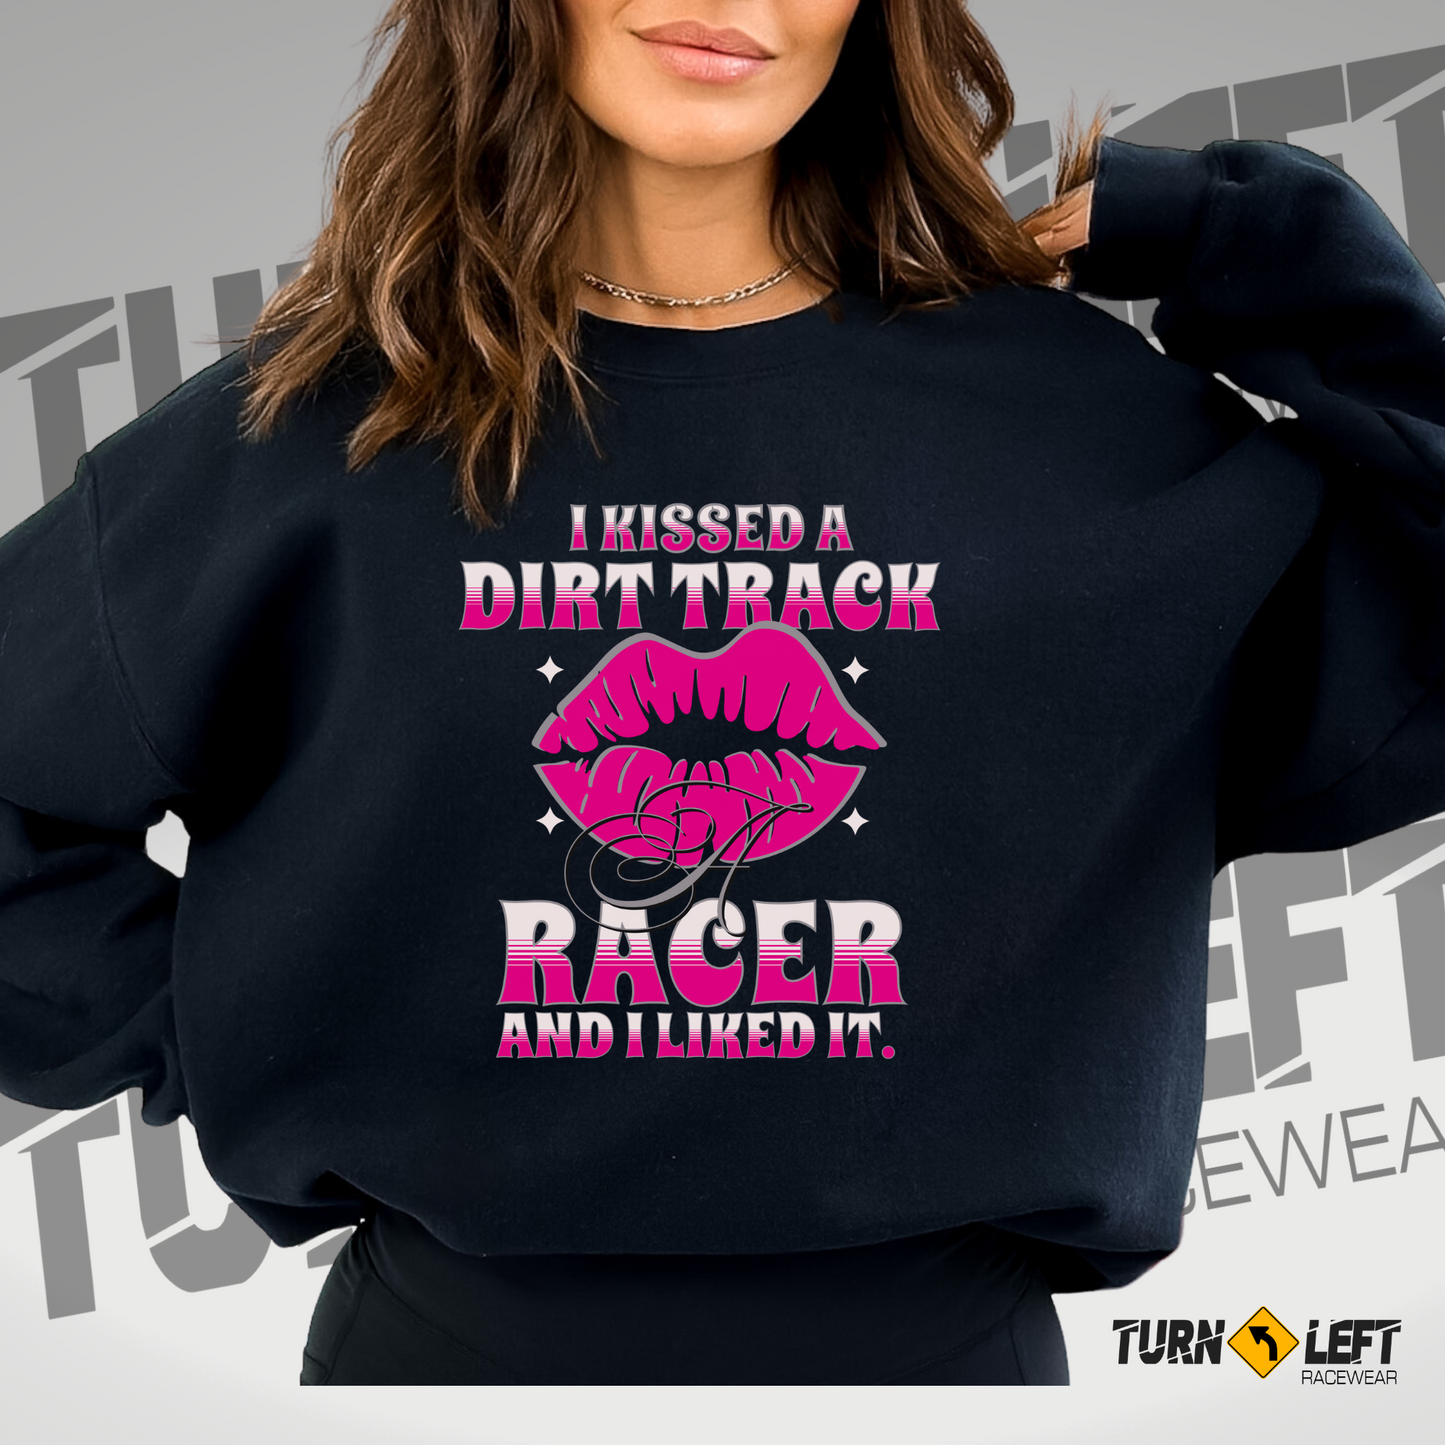 I Kissed A Dirt Track Racer And I Liked It Sweatshirt. Dirt Racers Wife Racers Girlfriend Shirts. 